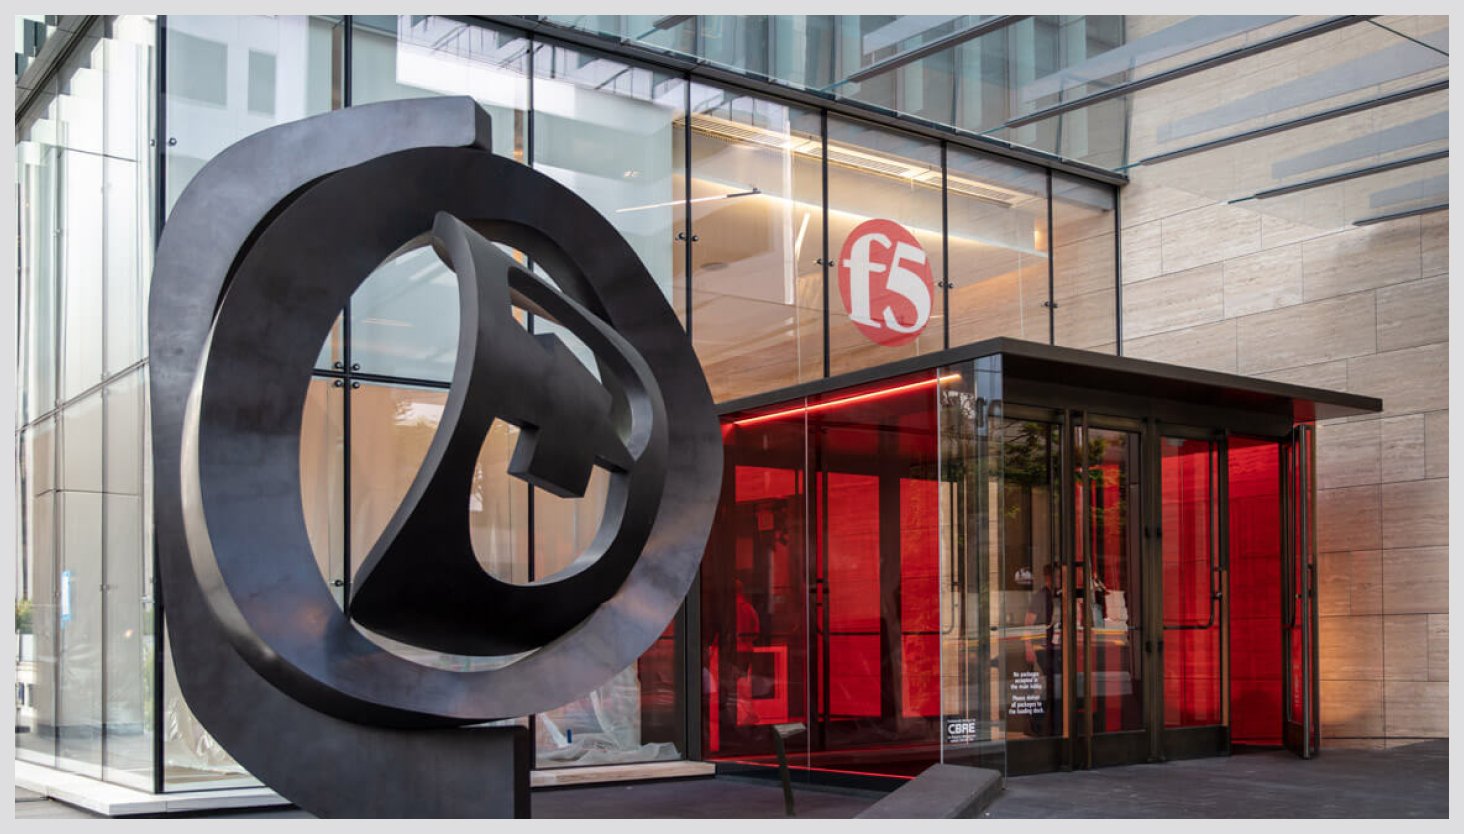 Photograph of F5 Networks office